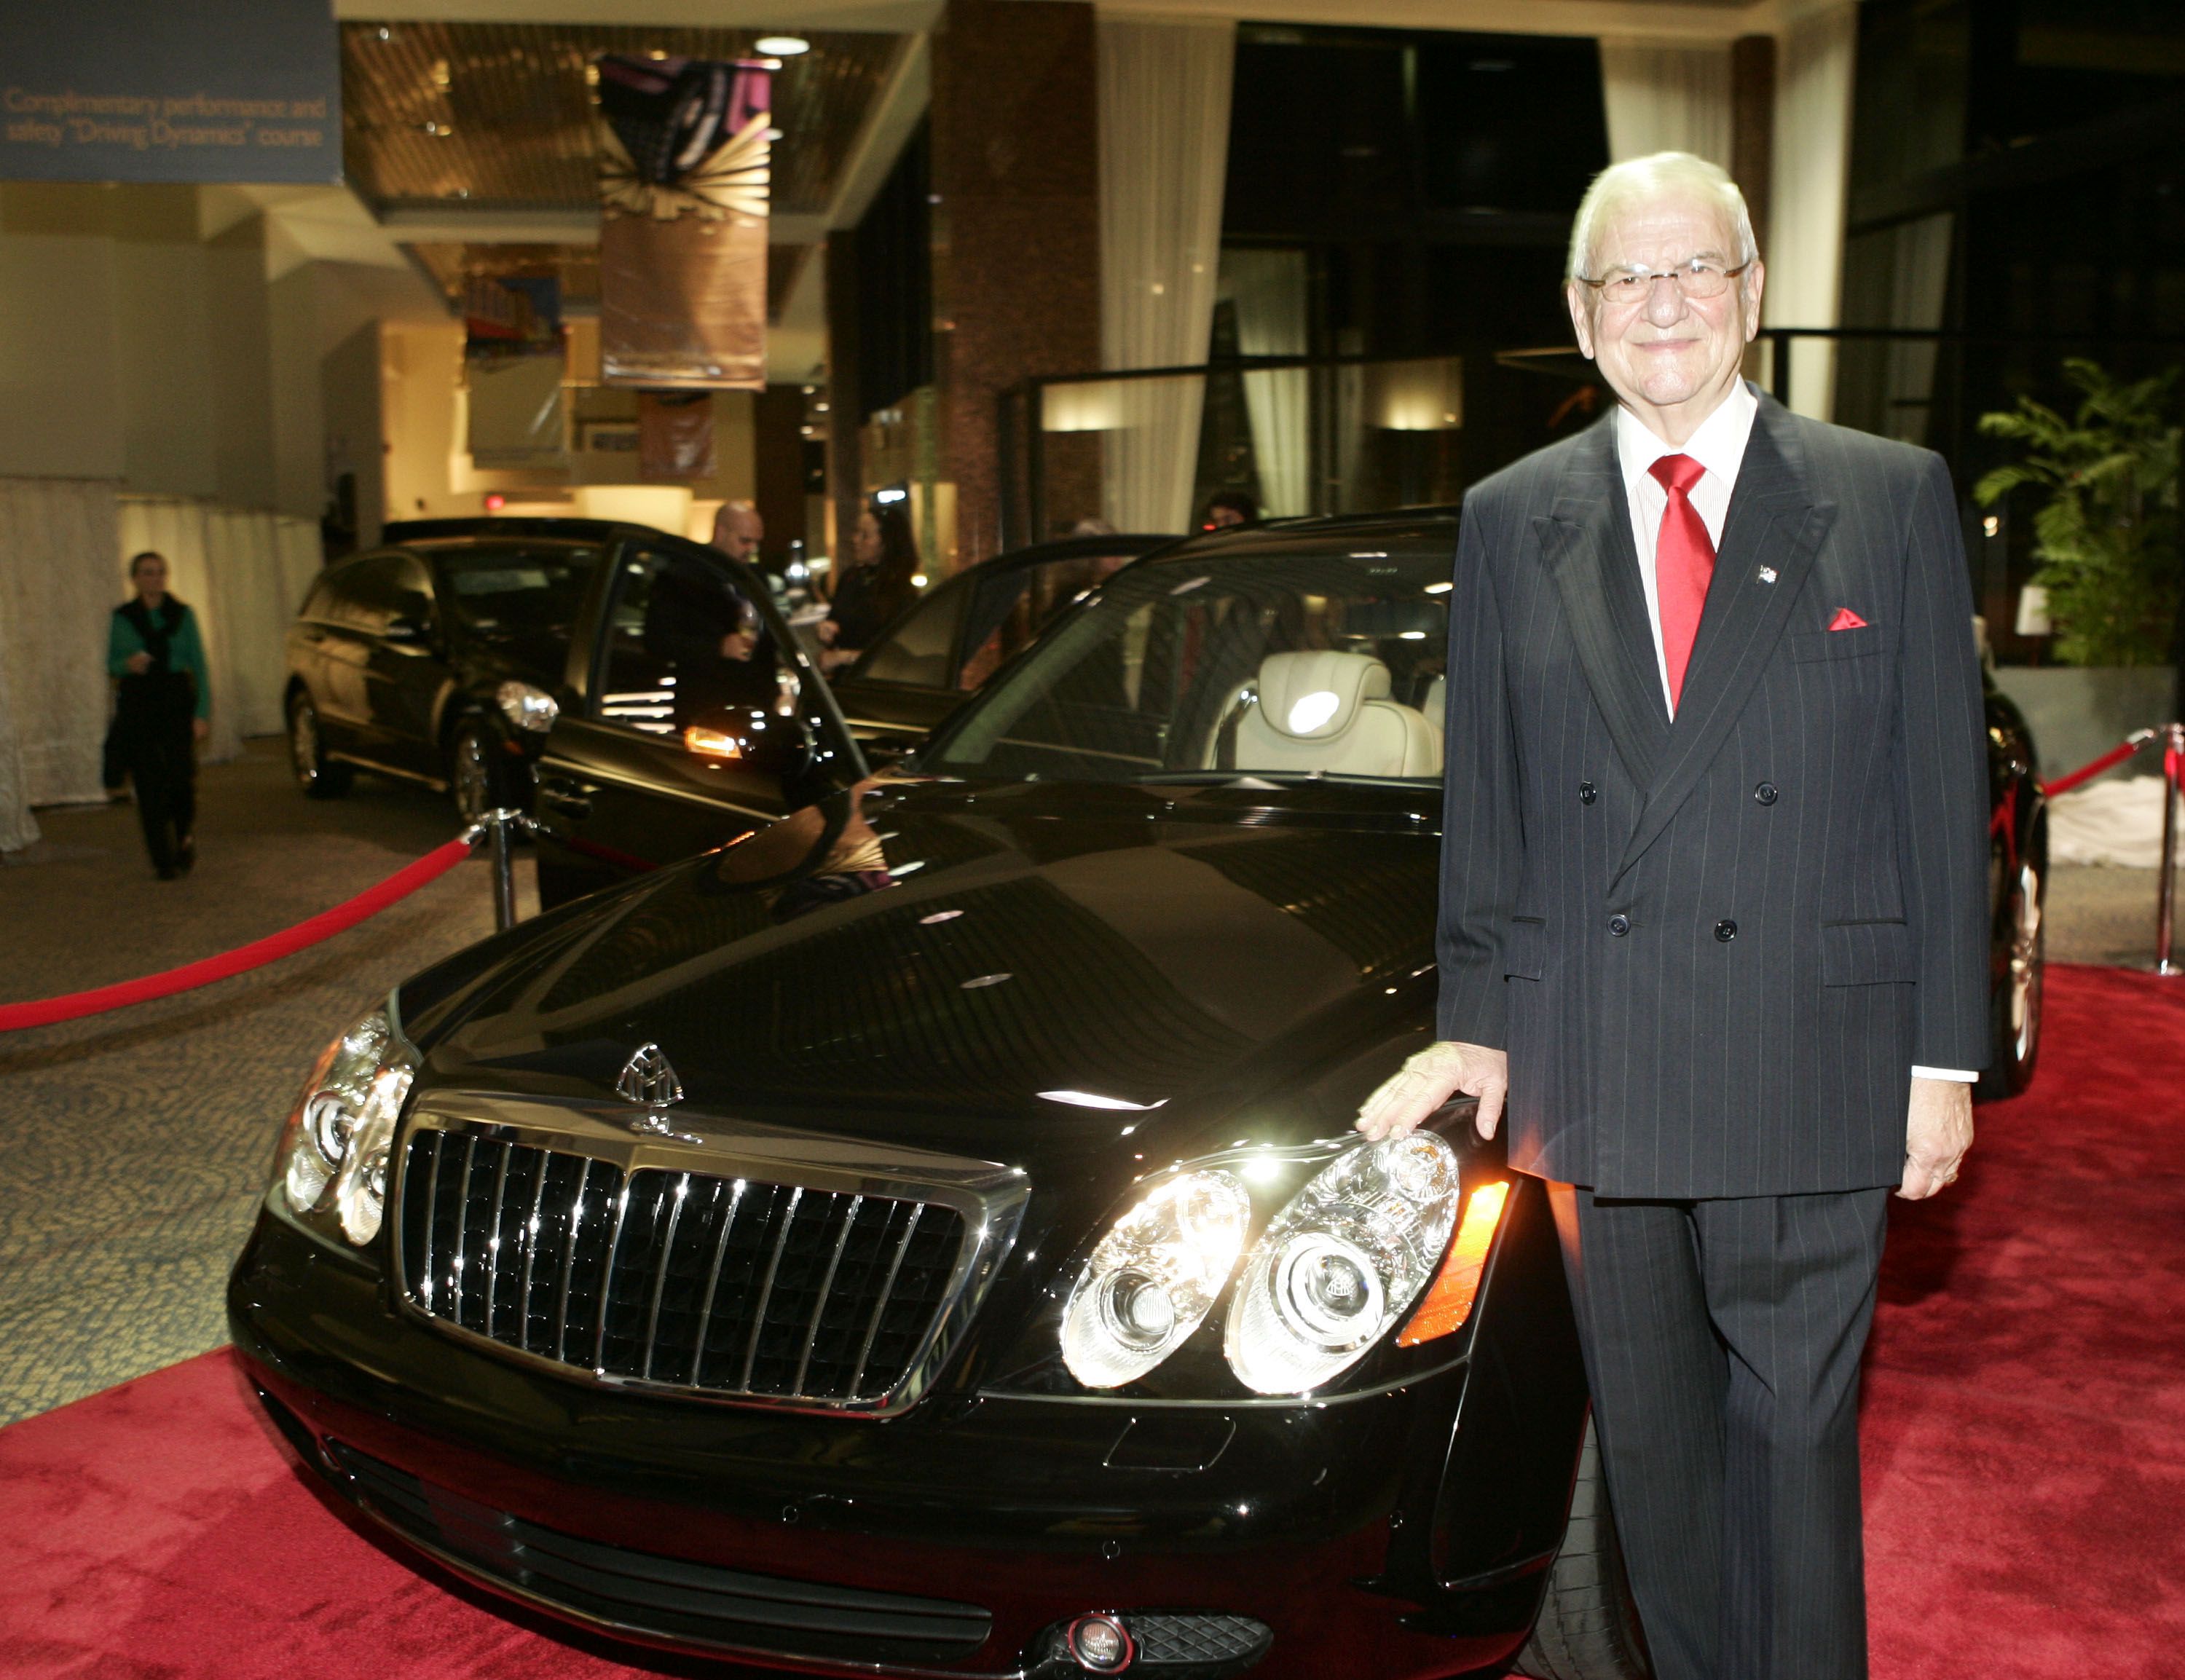 In this image, Lee Iacocca stands in front of a Benz